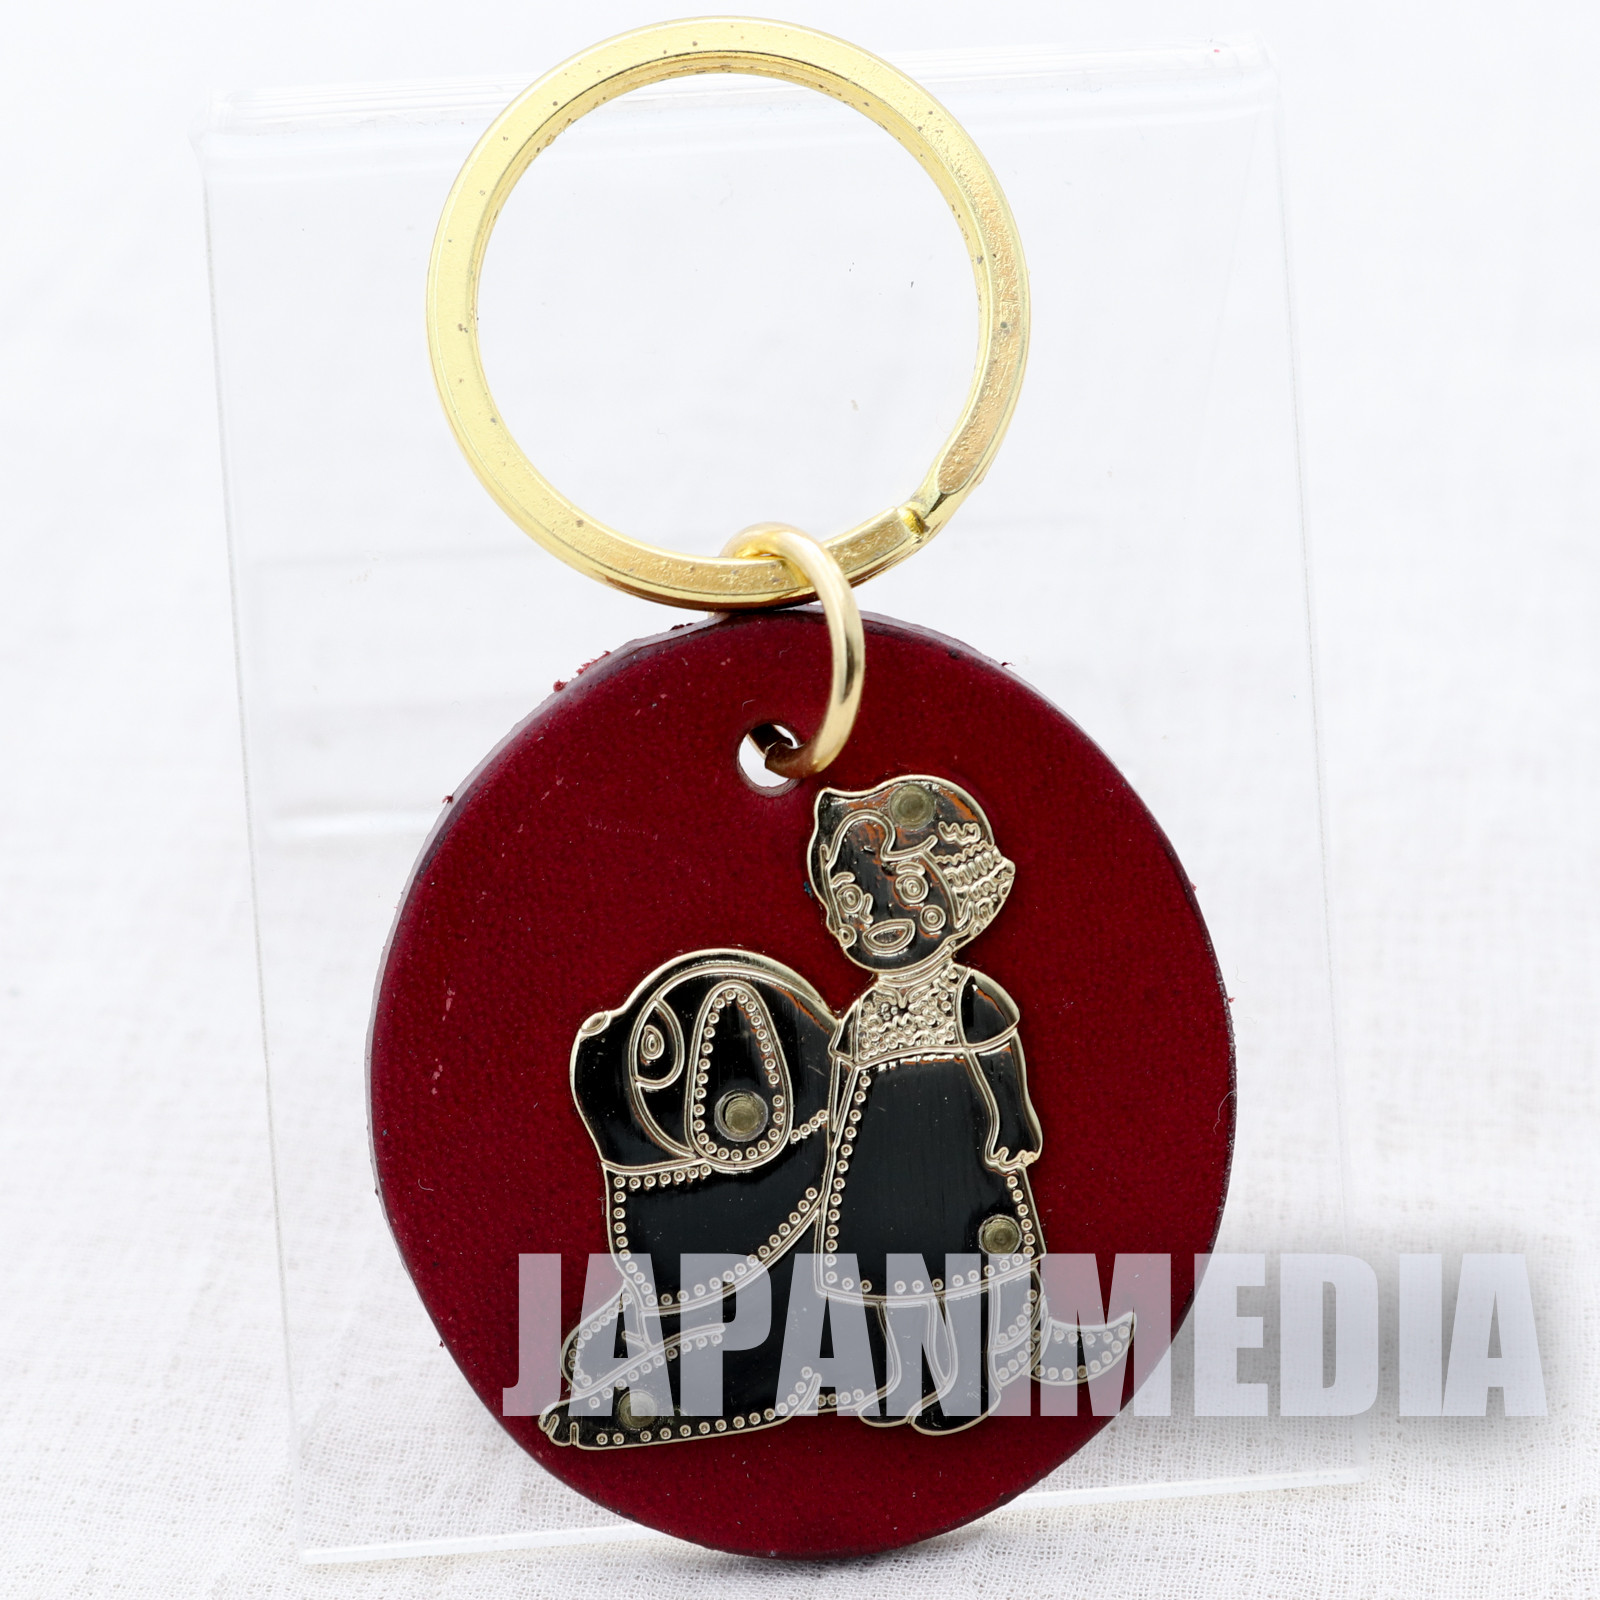 Heidi Girl of the Alps Exhibition Limited Metal Plater Keychain JAPAN ANIME